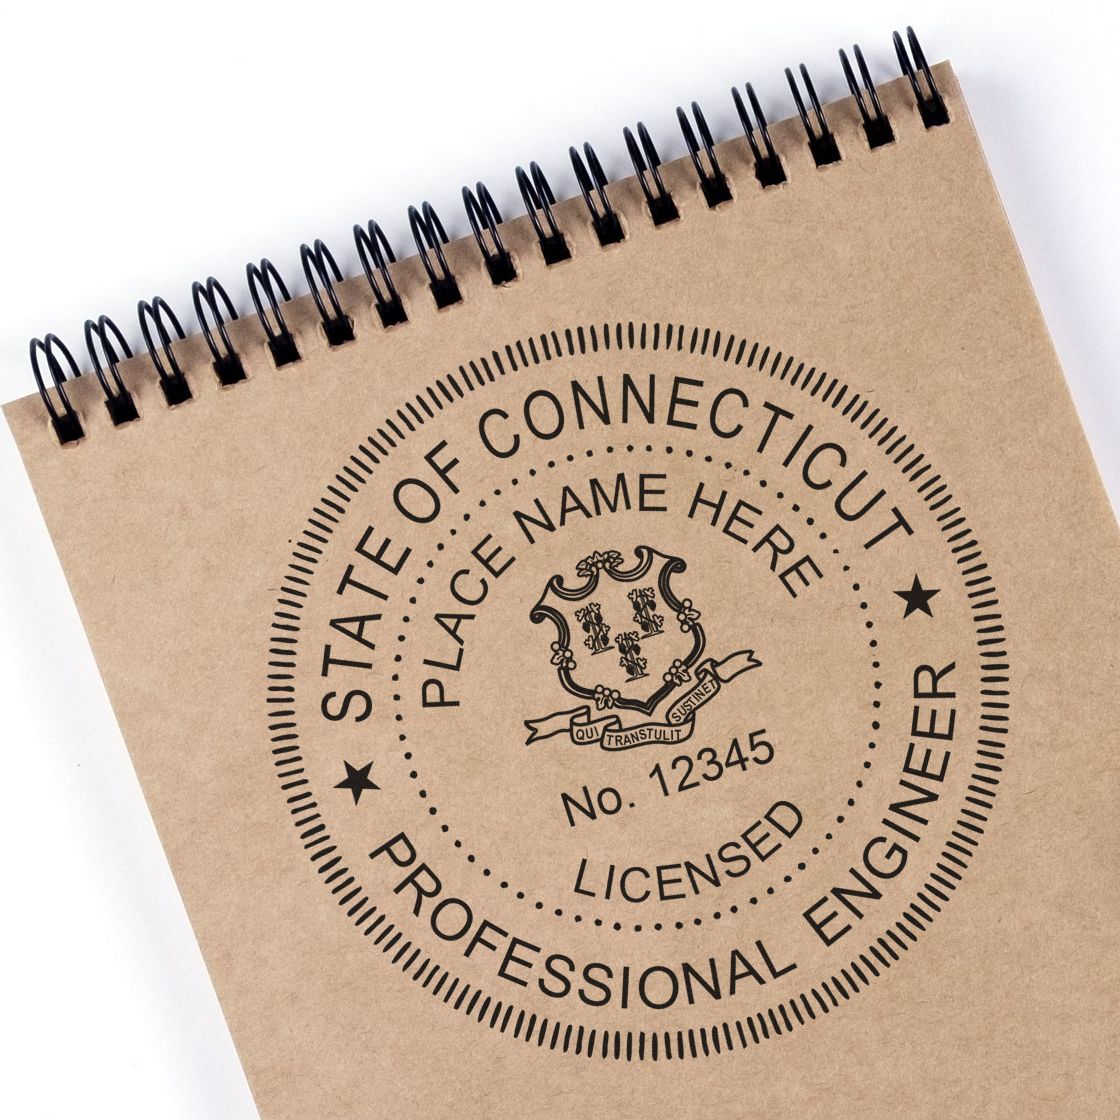 Another Example of a stamped impression of the Connecticut Professional Engineer Seal Stamp on a piece of office paper.